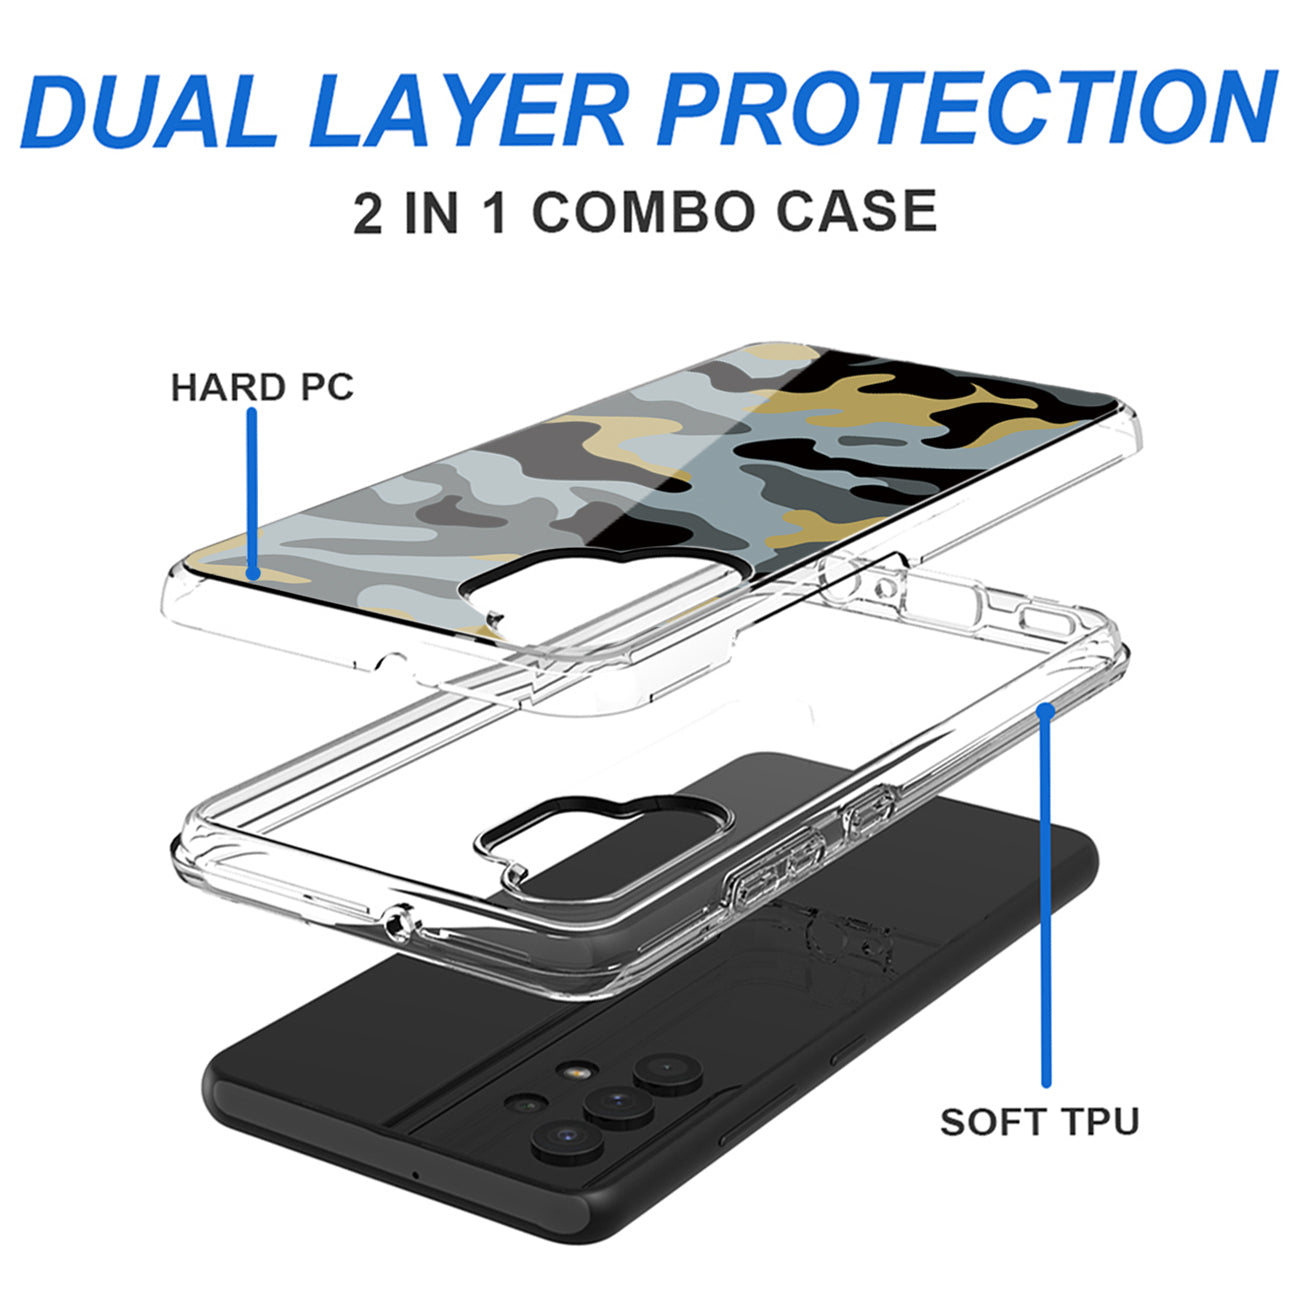 Camouflage Dual Layer Hybrid Hard & Soft TPU Rubber Case for SAMS GALAXY A32 5G In Blue